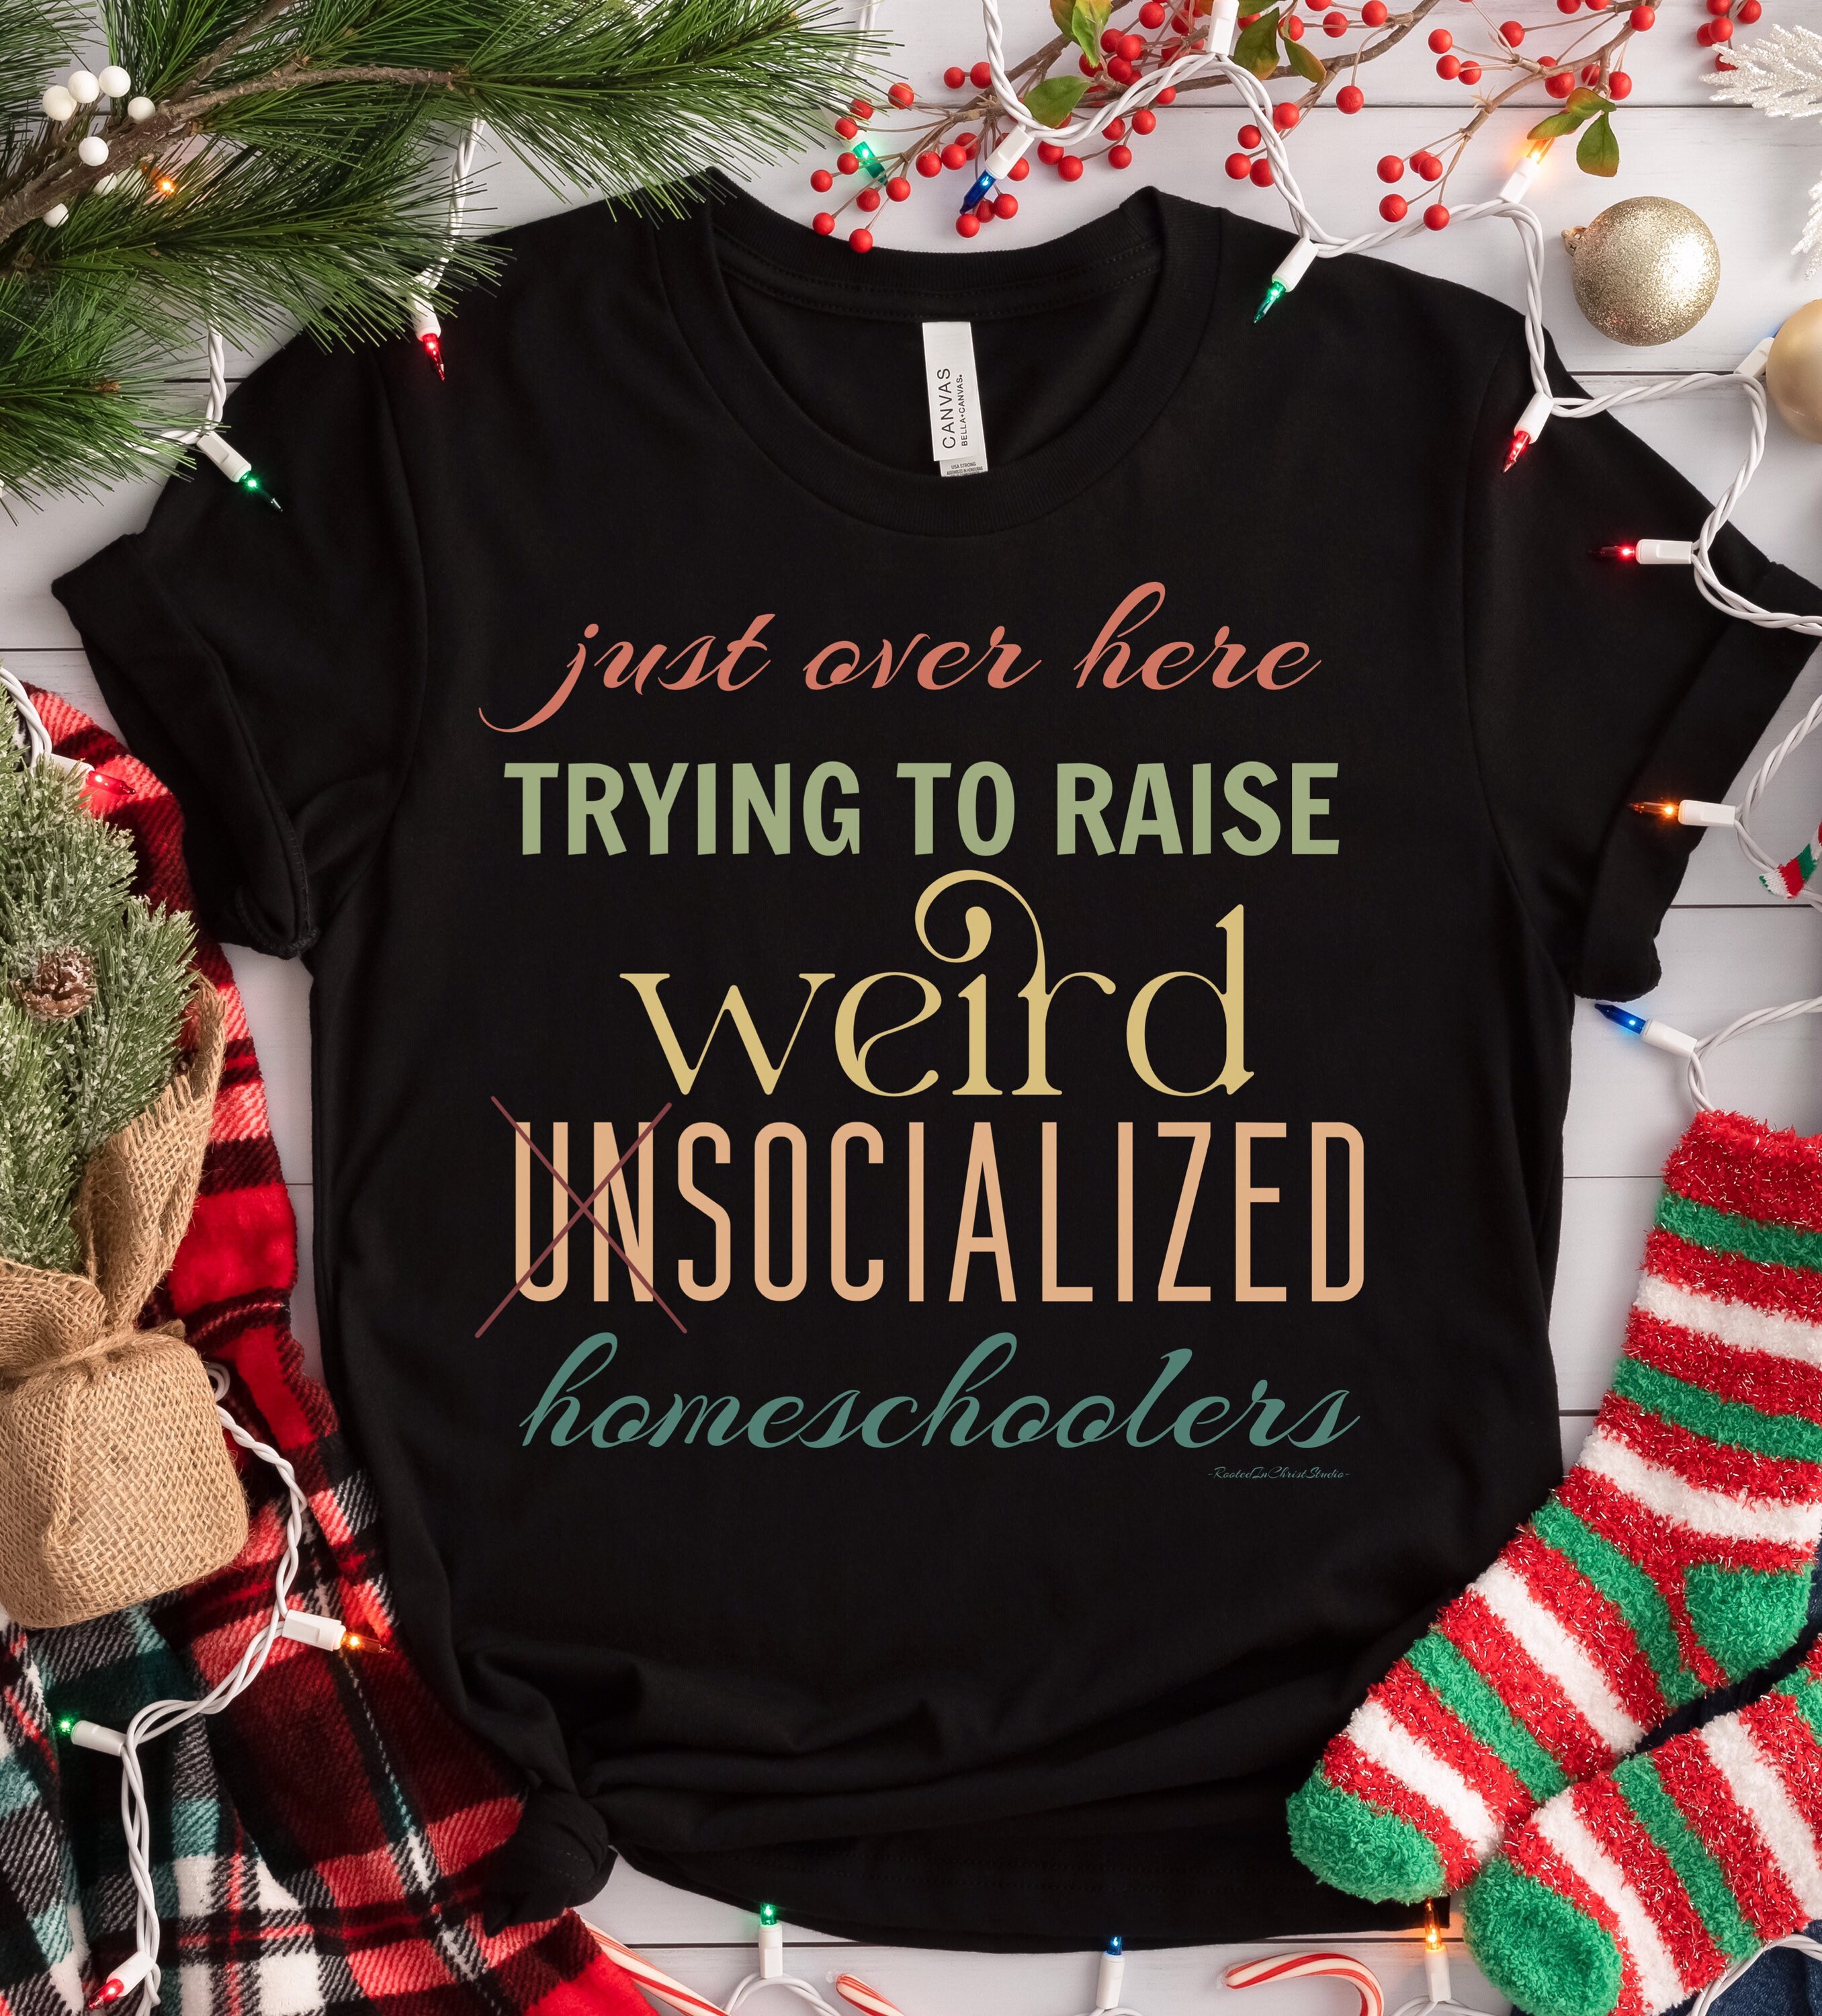 20 Last-Minute Christmas Gift Ideas for the Mom Who Has Everything - Weird,  Unsocialized Homeschoolers